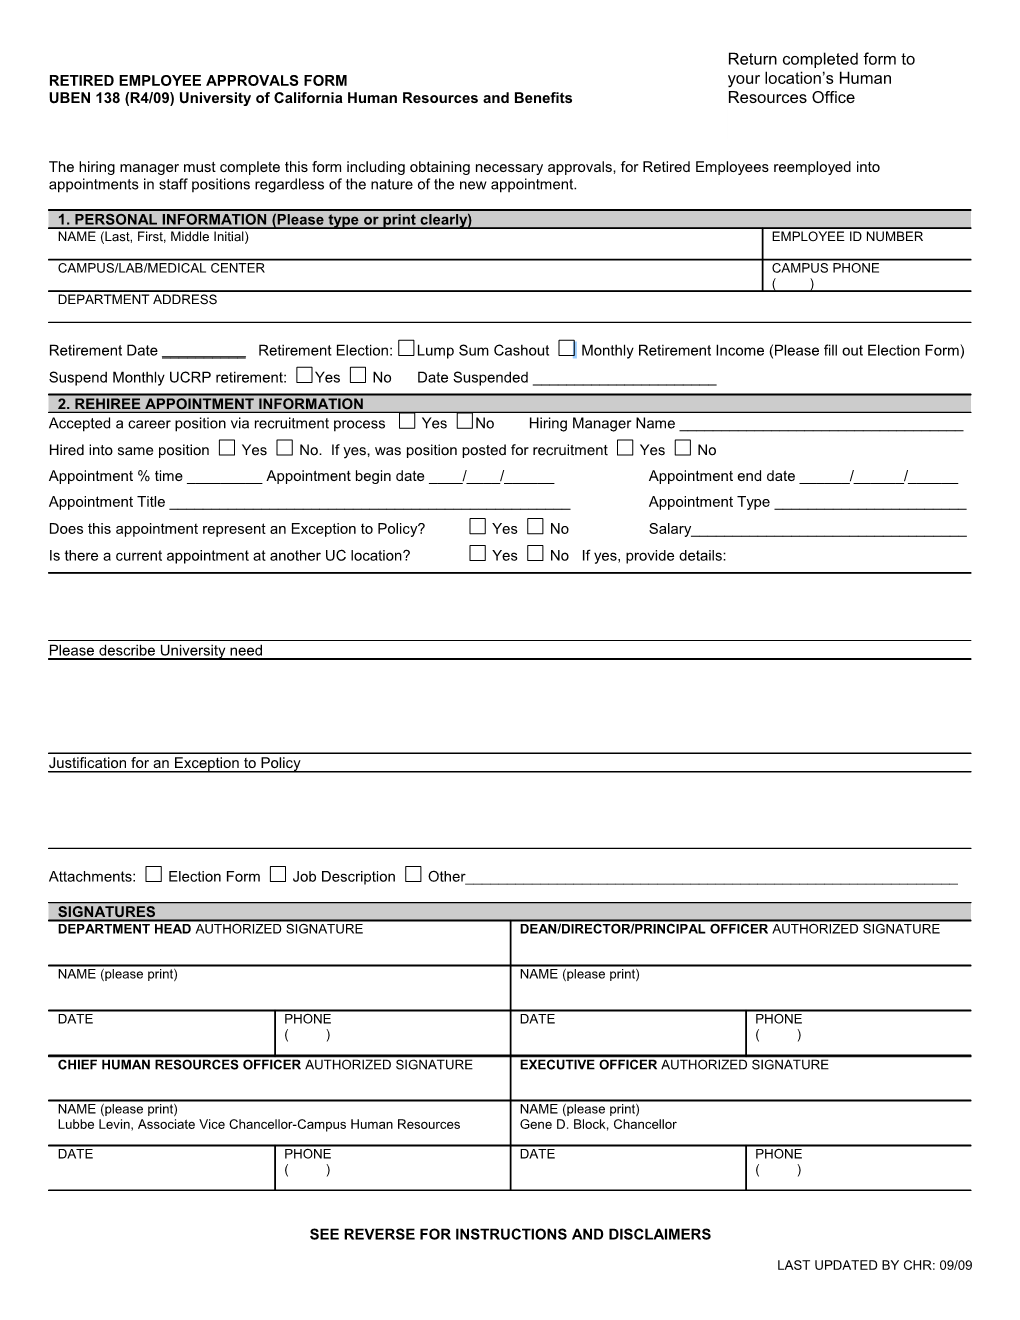 Retired Employee Approvals Form